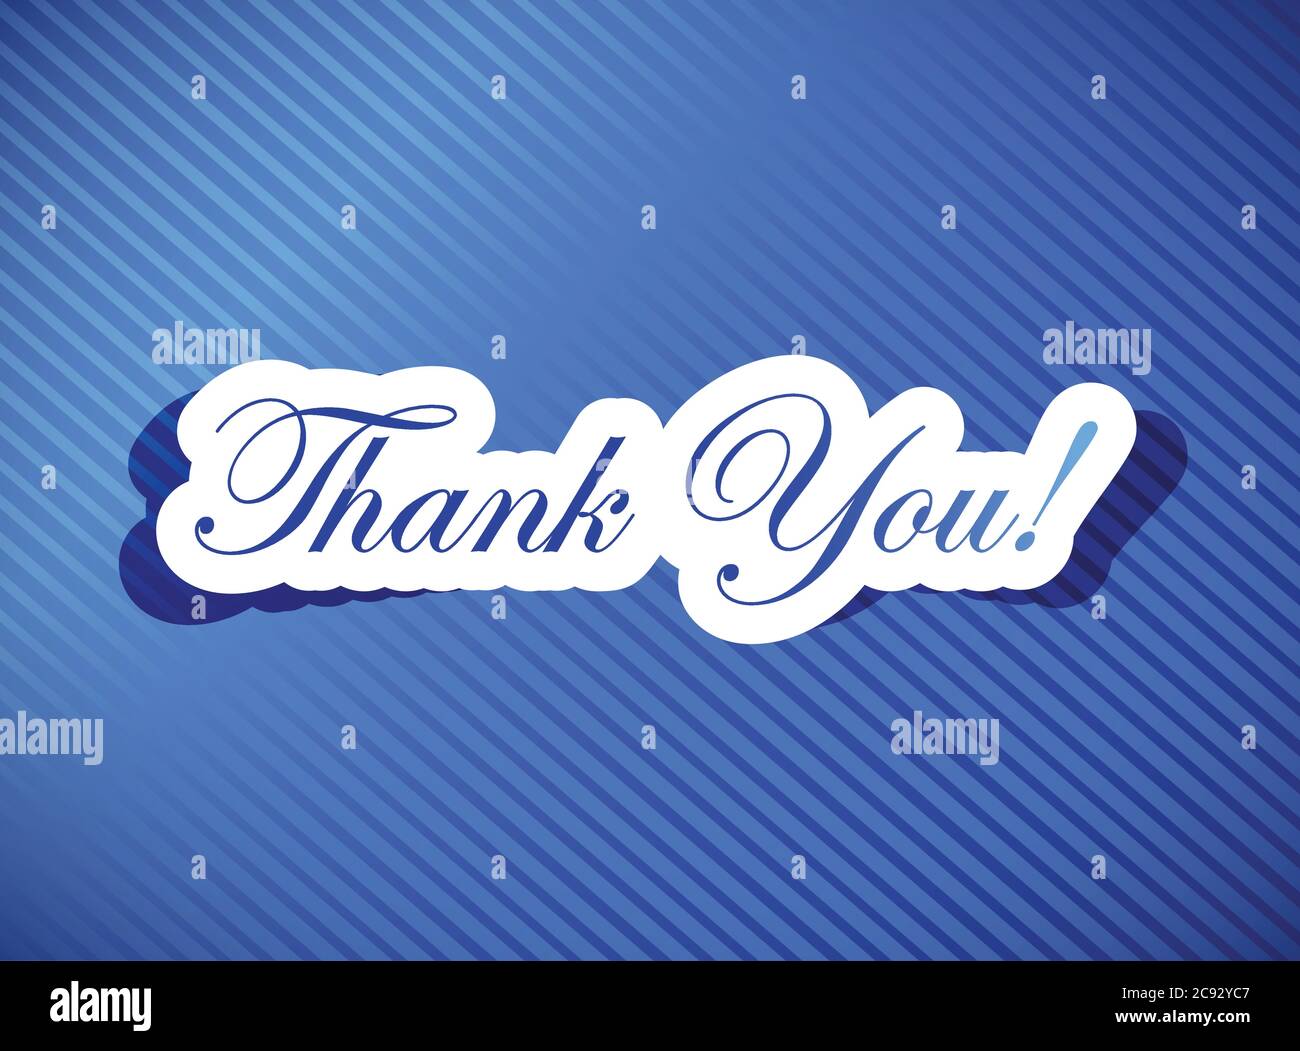 Thank you card illustration design over a blue background Stock Vector